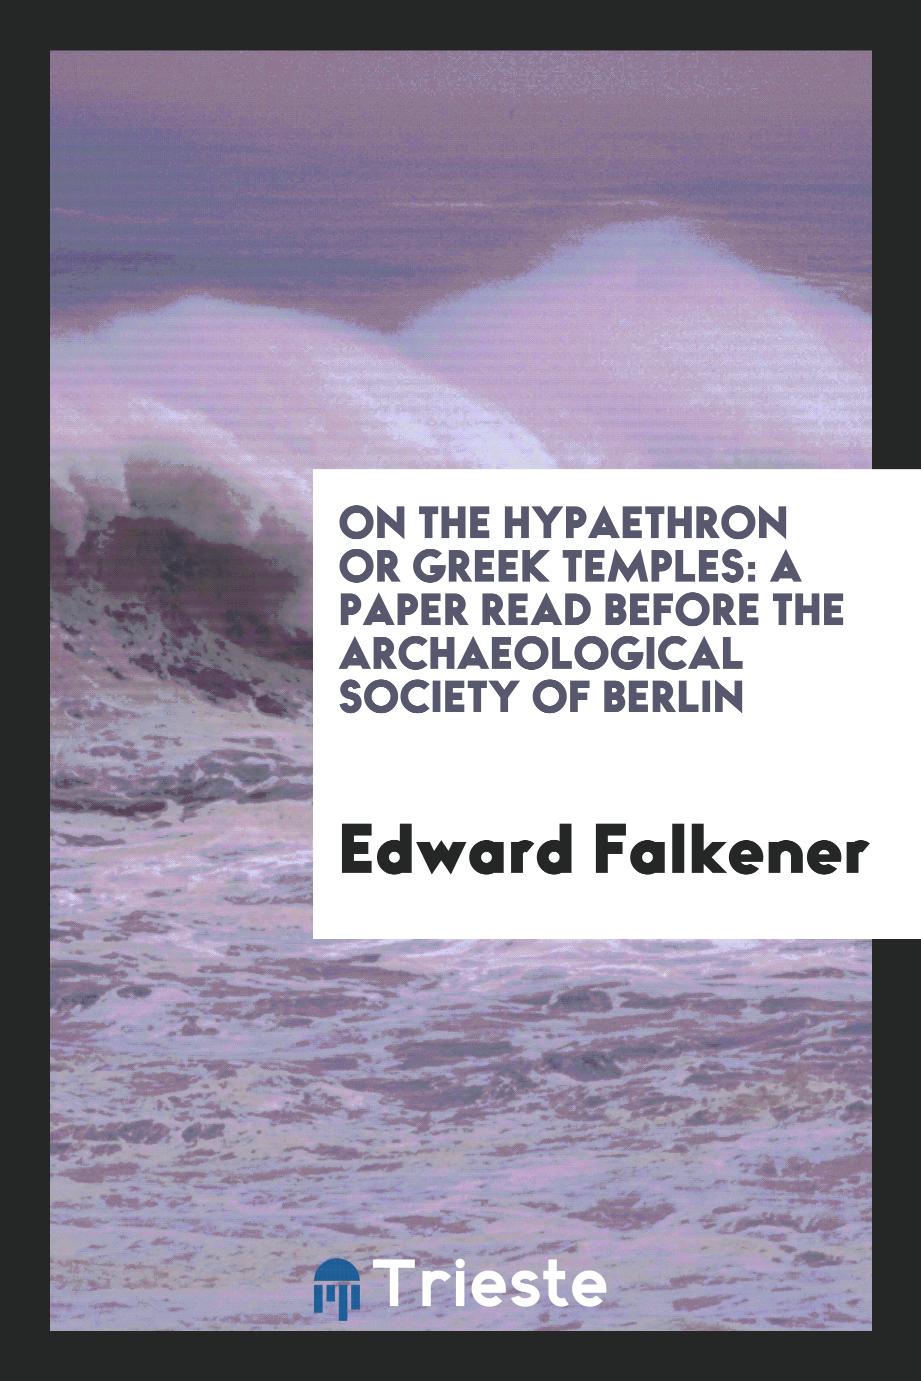 On the Hypaethron Or Greek Temples: A Paper Read Before the Archaeological Society of Berlin